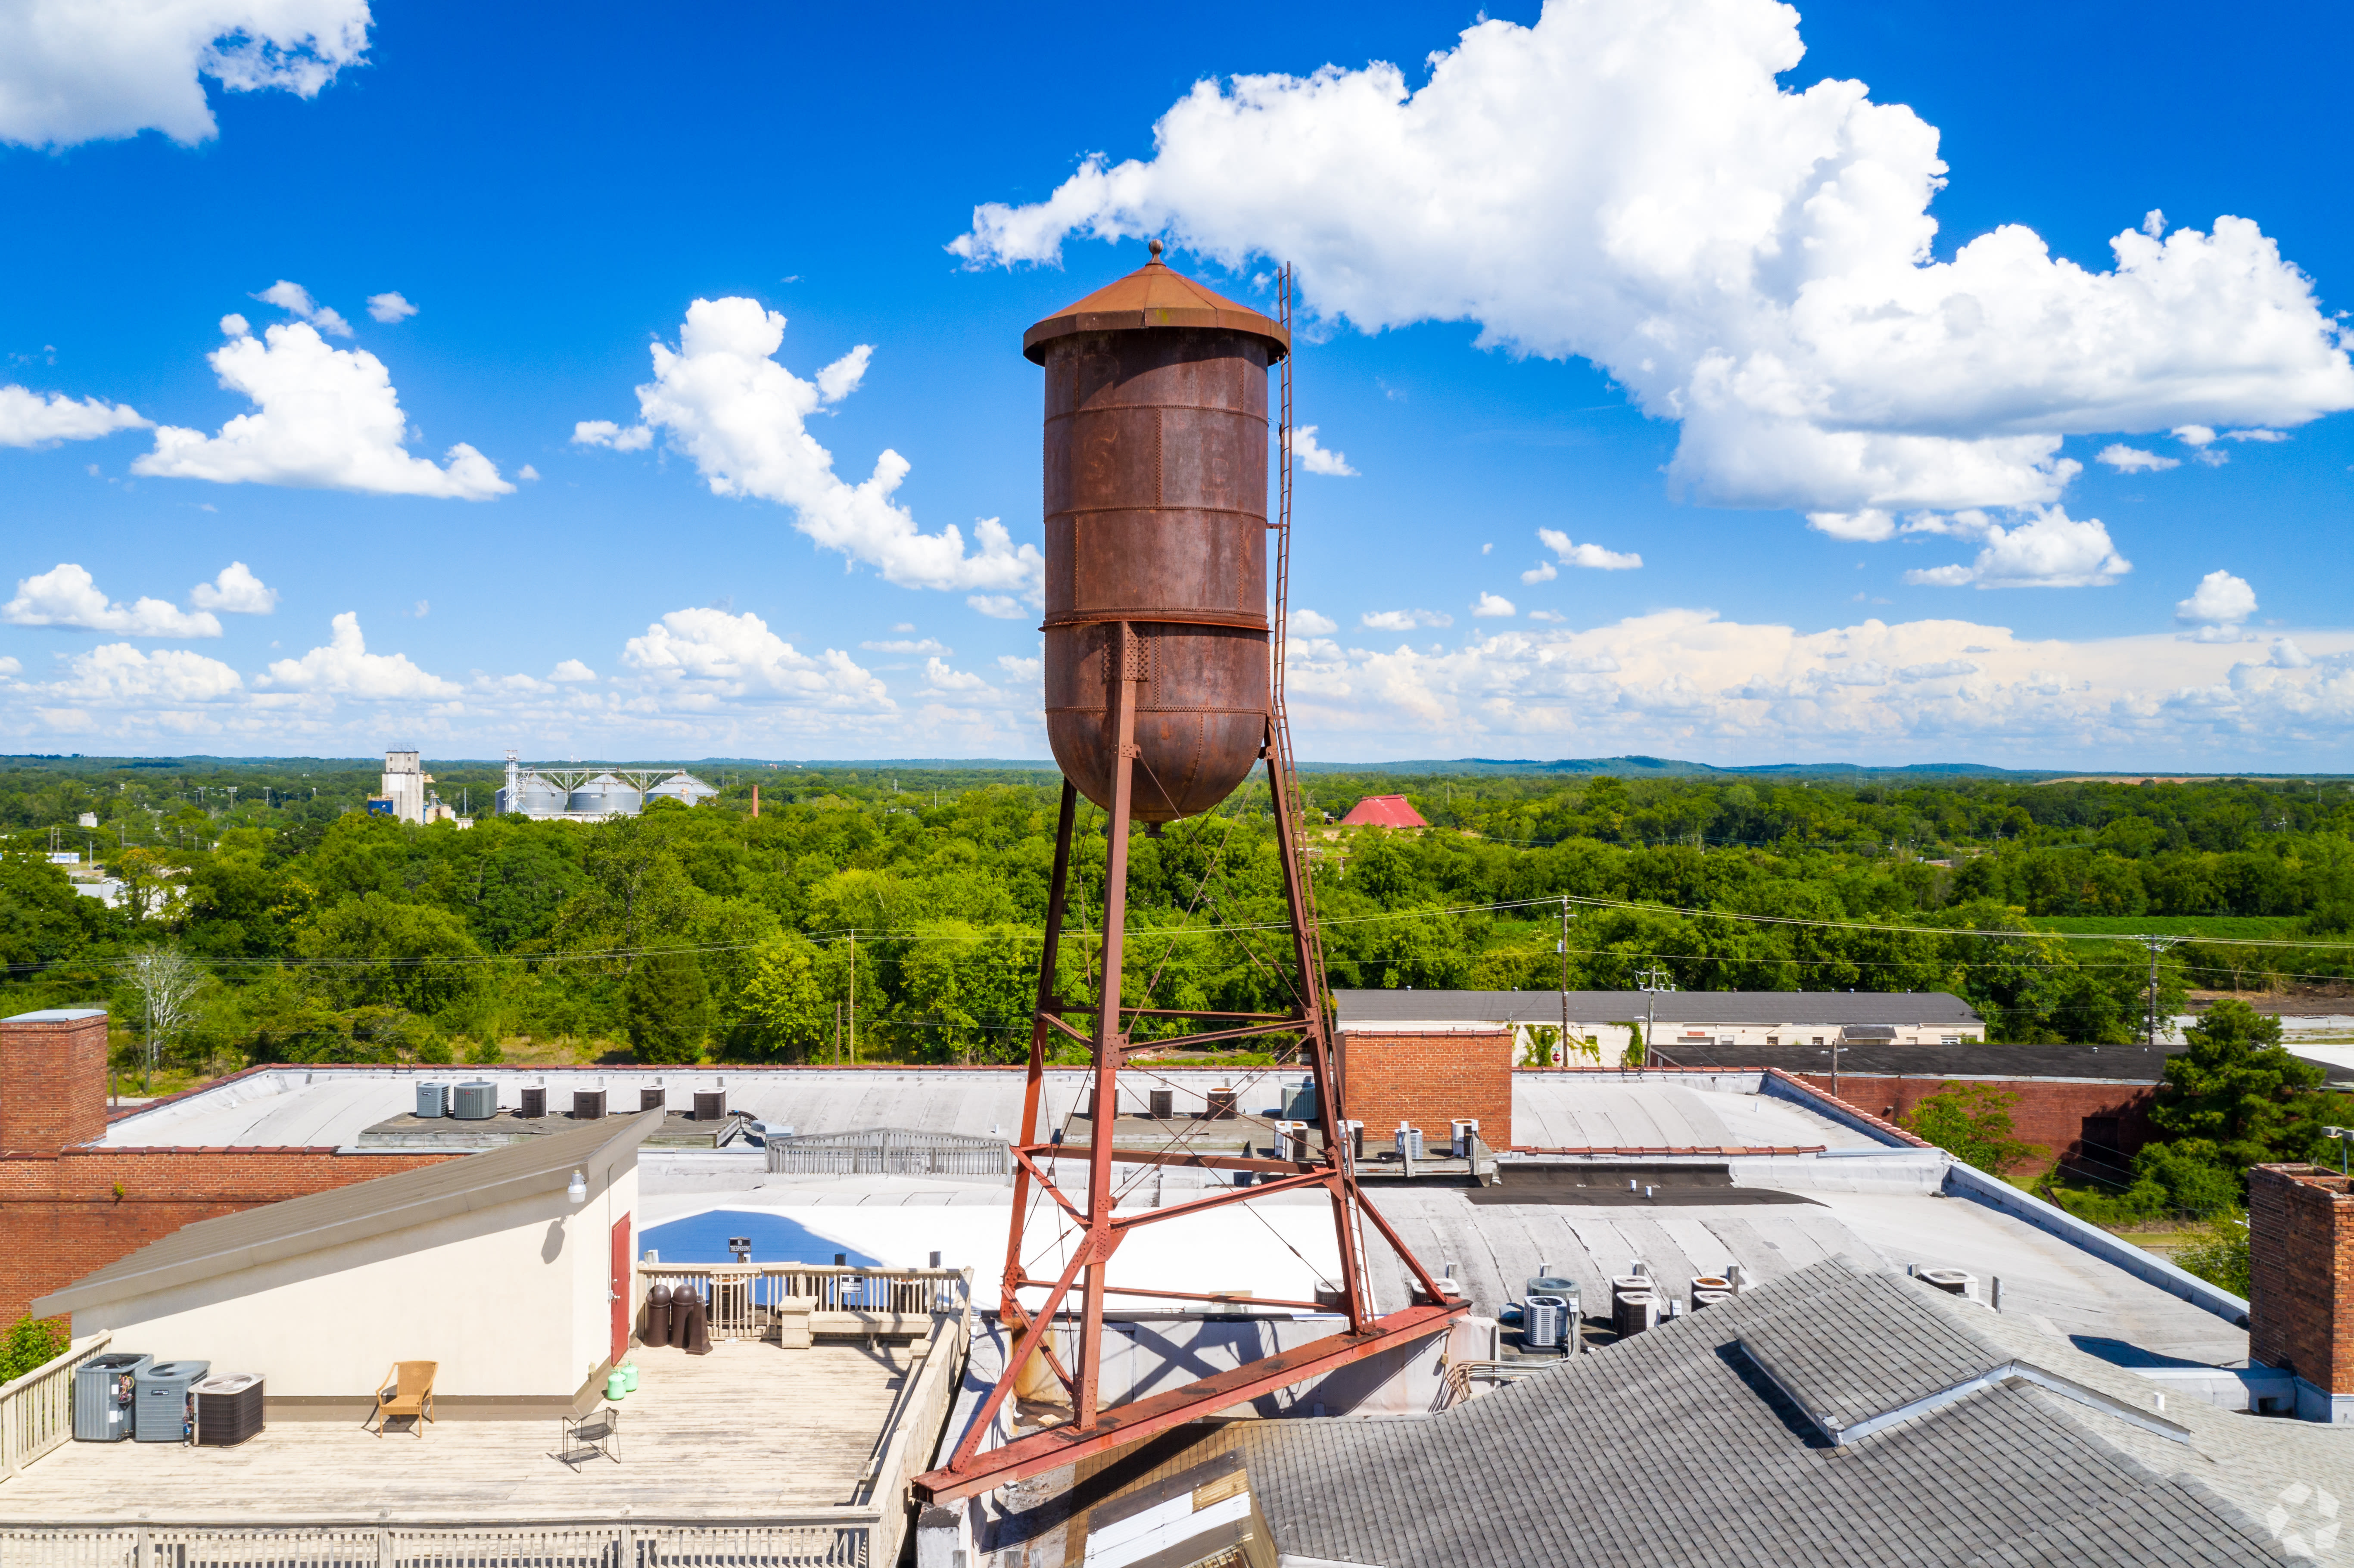 Historic water tower at Broadway Lofts in Macon, Georgia